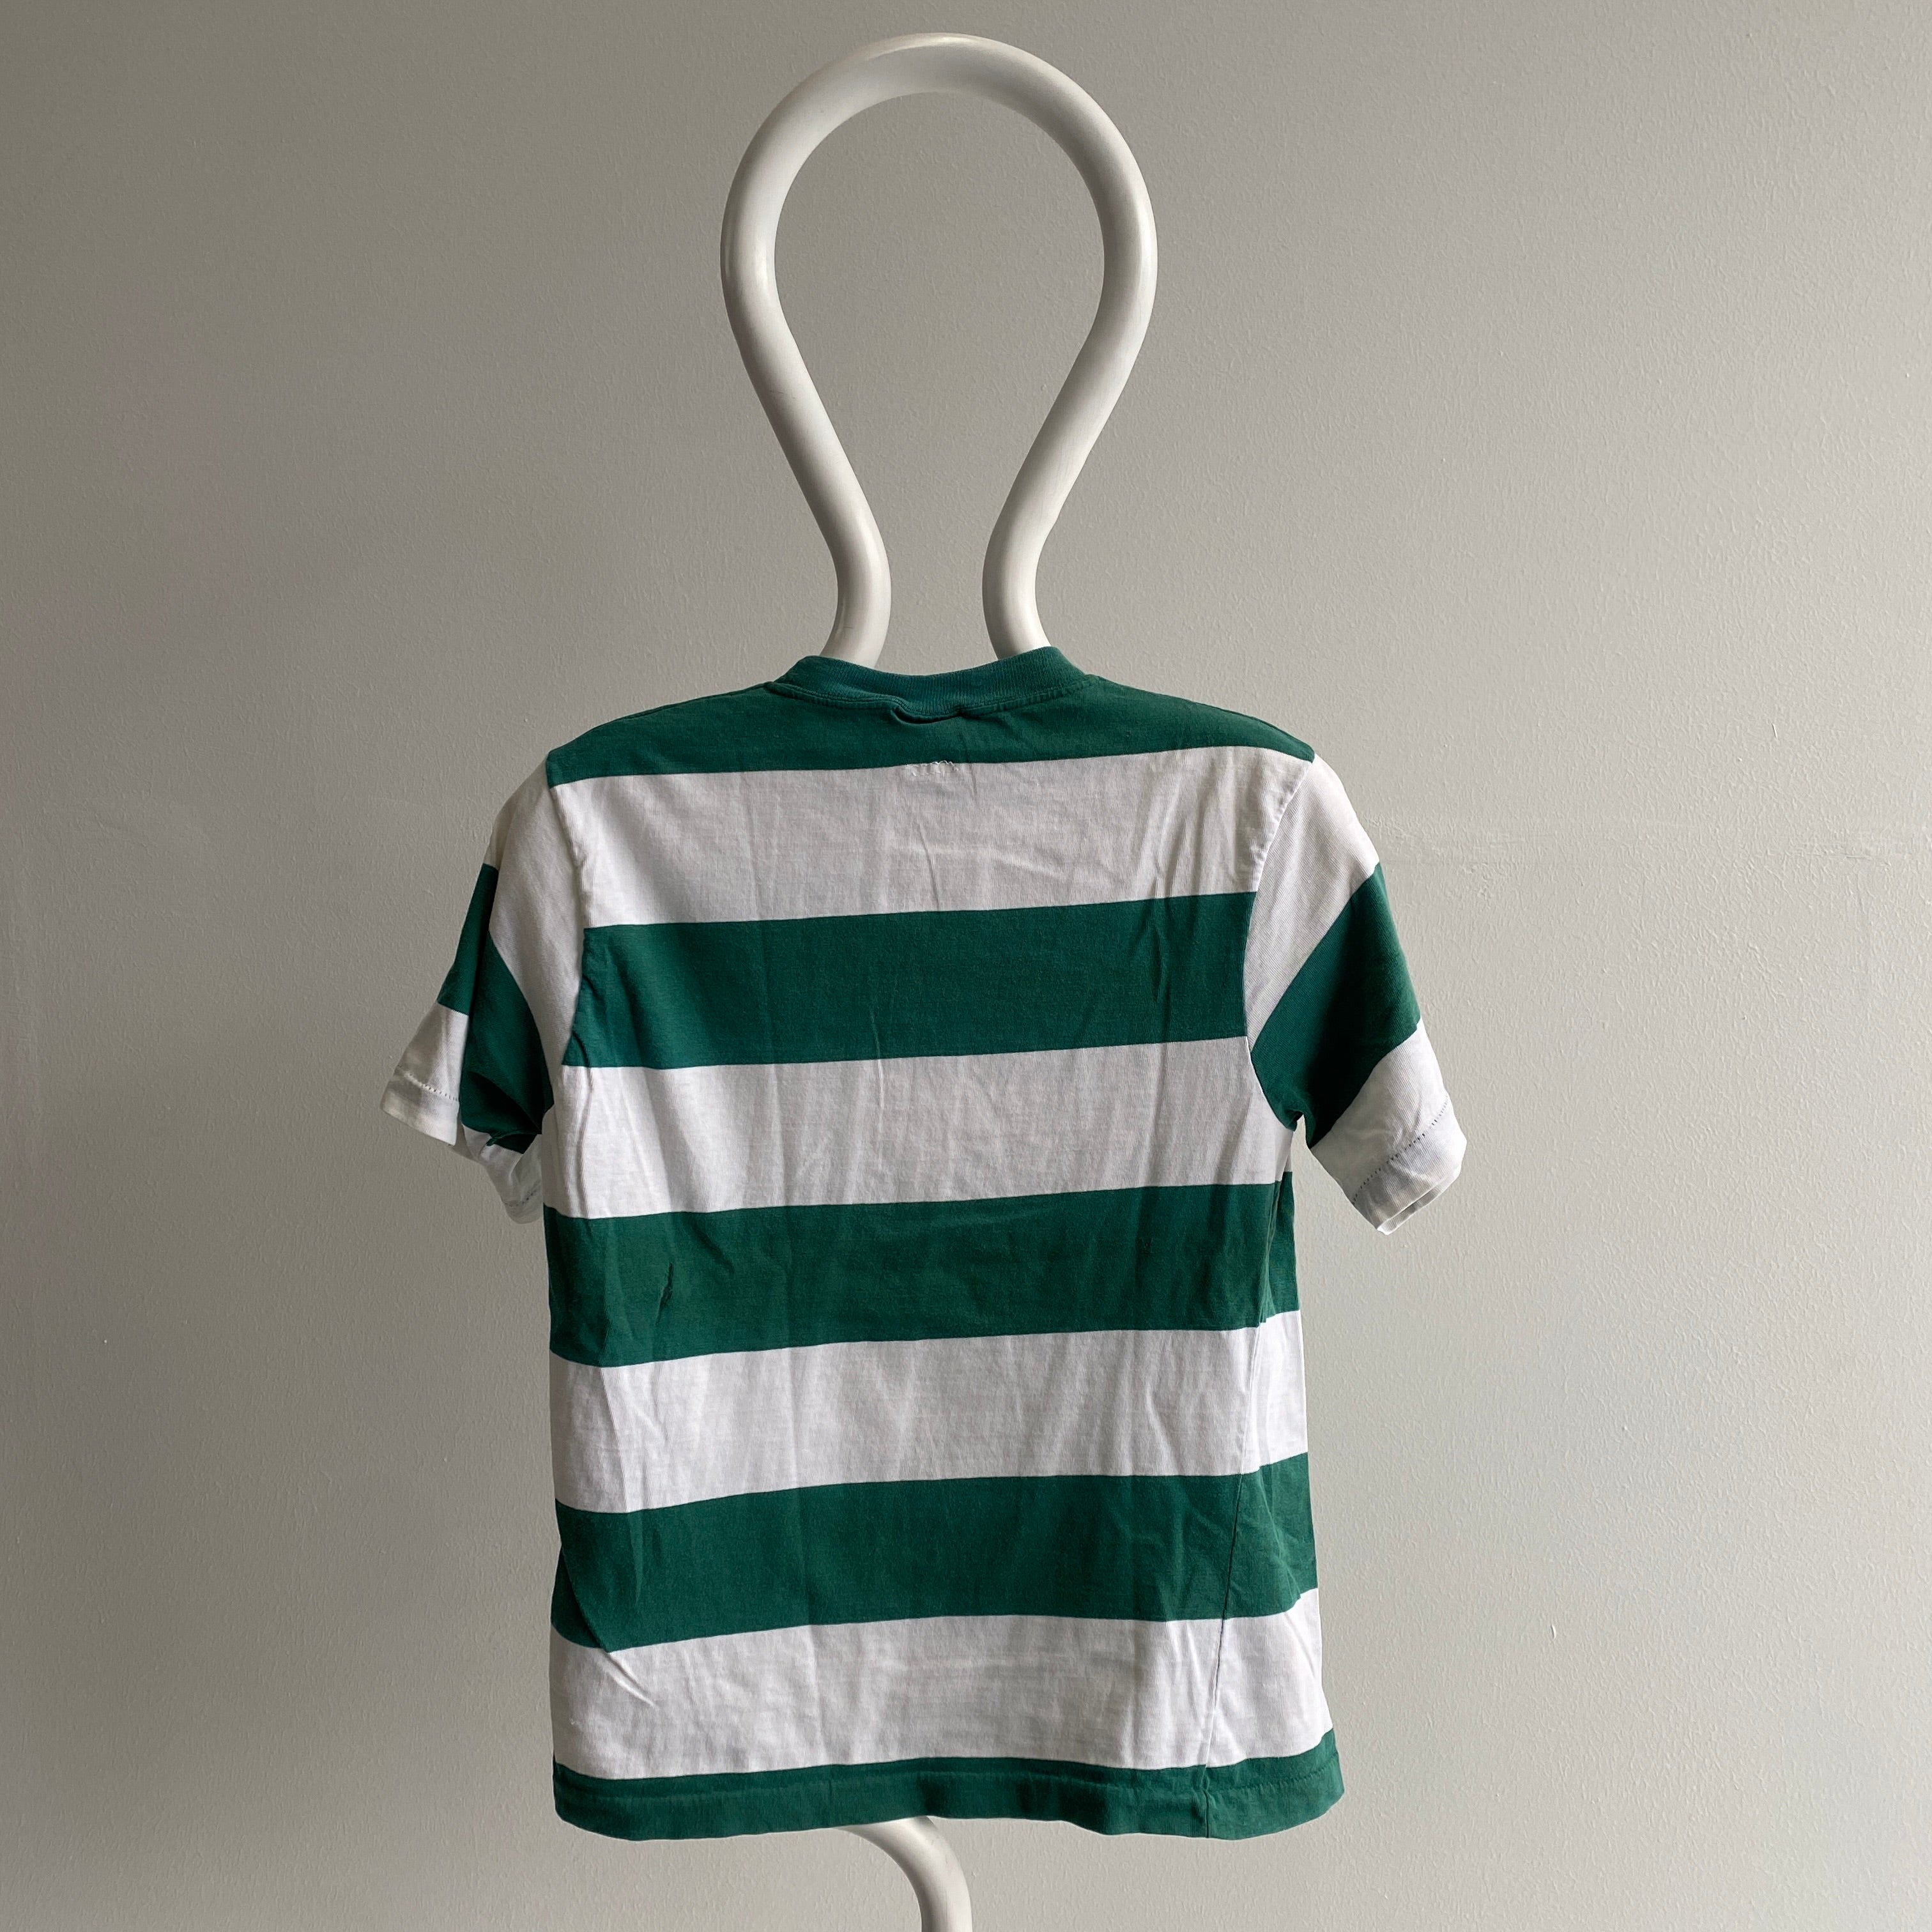 1980s Smaller Size Wide Striped T-Shirt